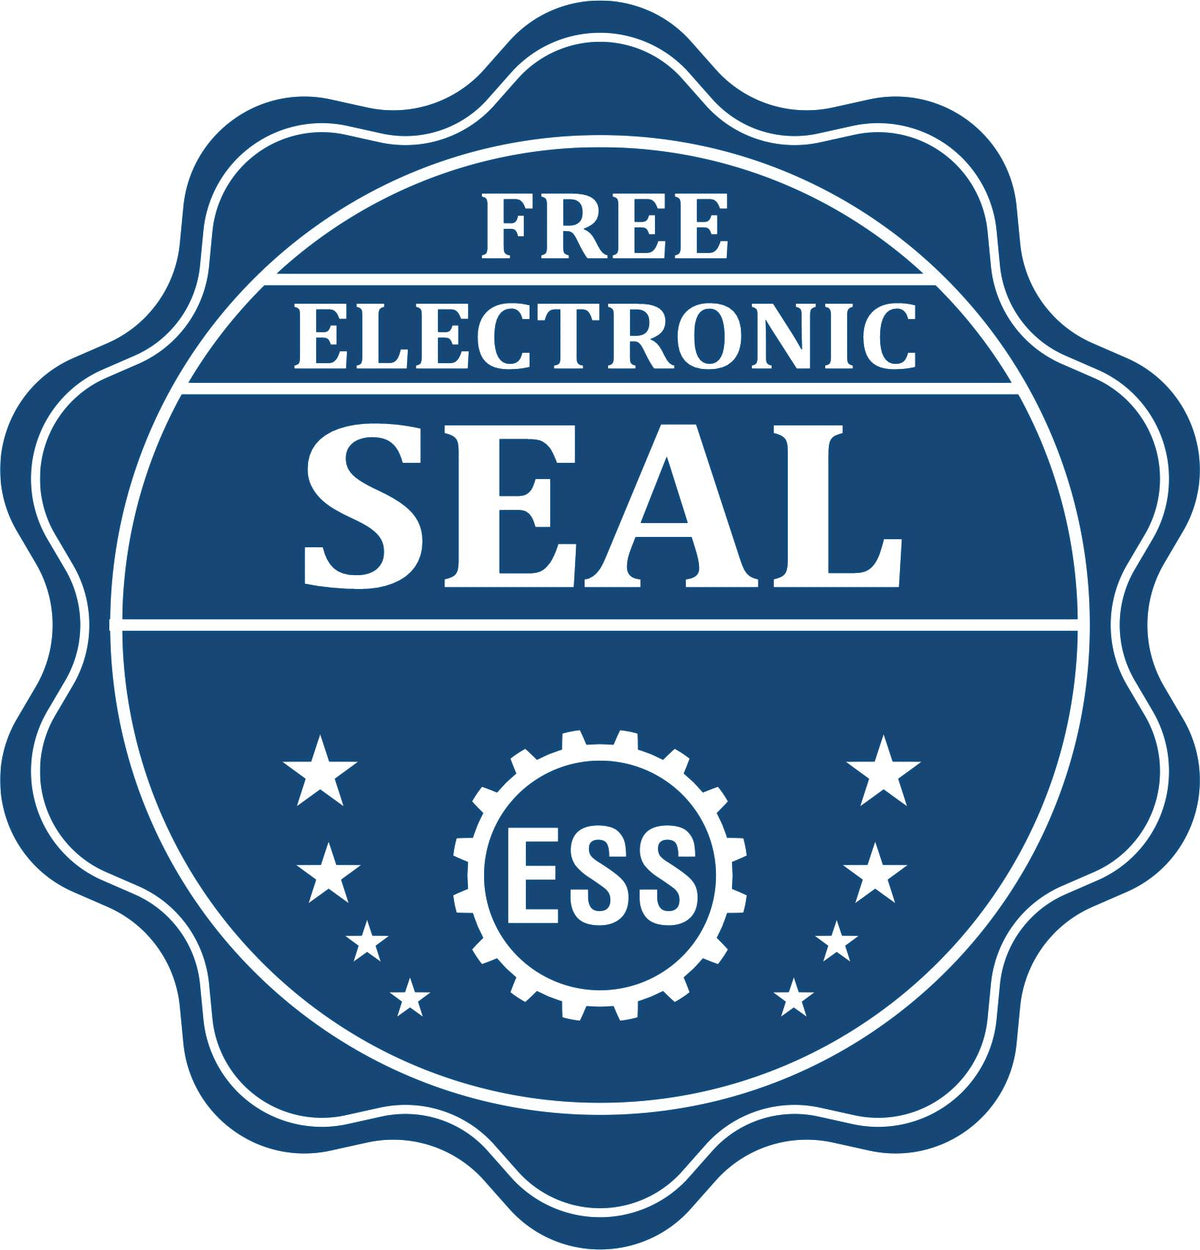 A badge showing a free electronic seal for the State of Maryland Extended Long Reach Engineer Seal with stars and the ESS gear on the emblem.